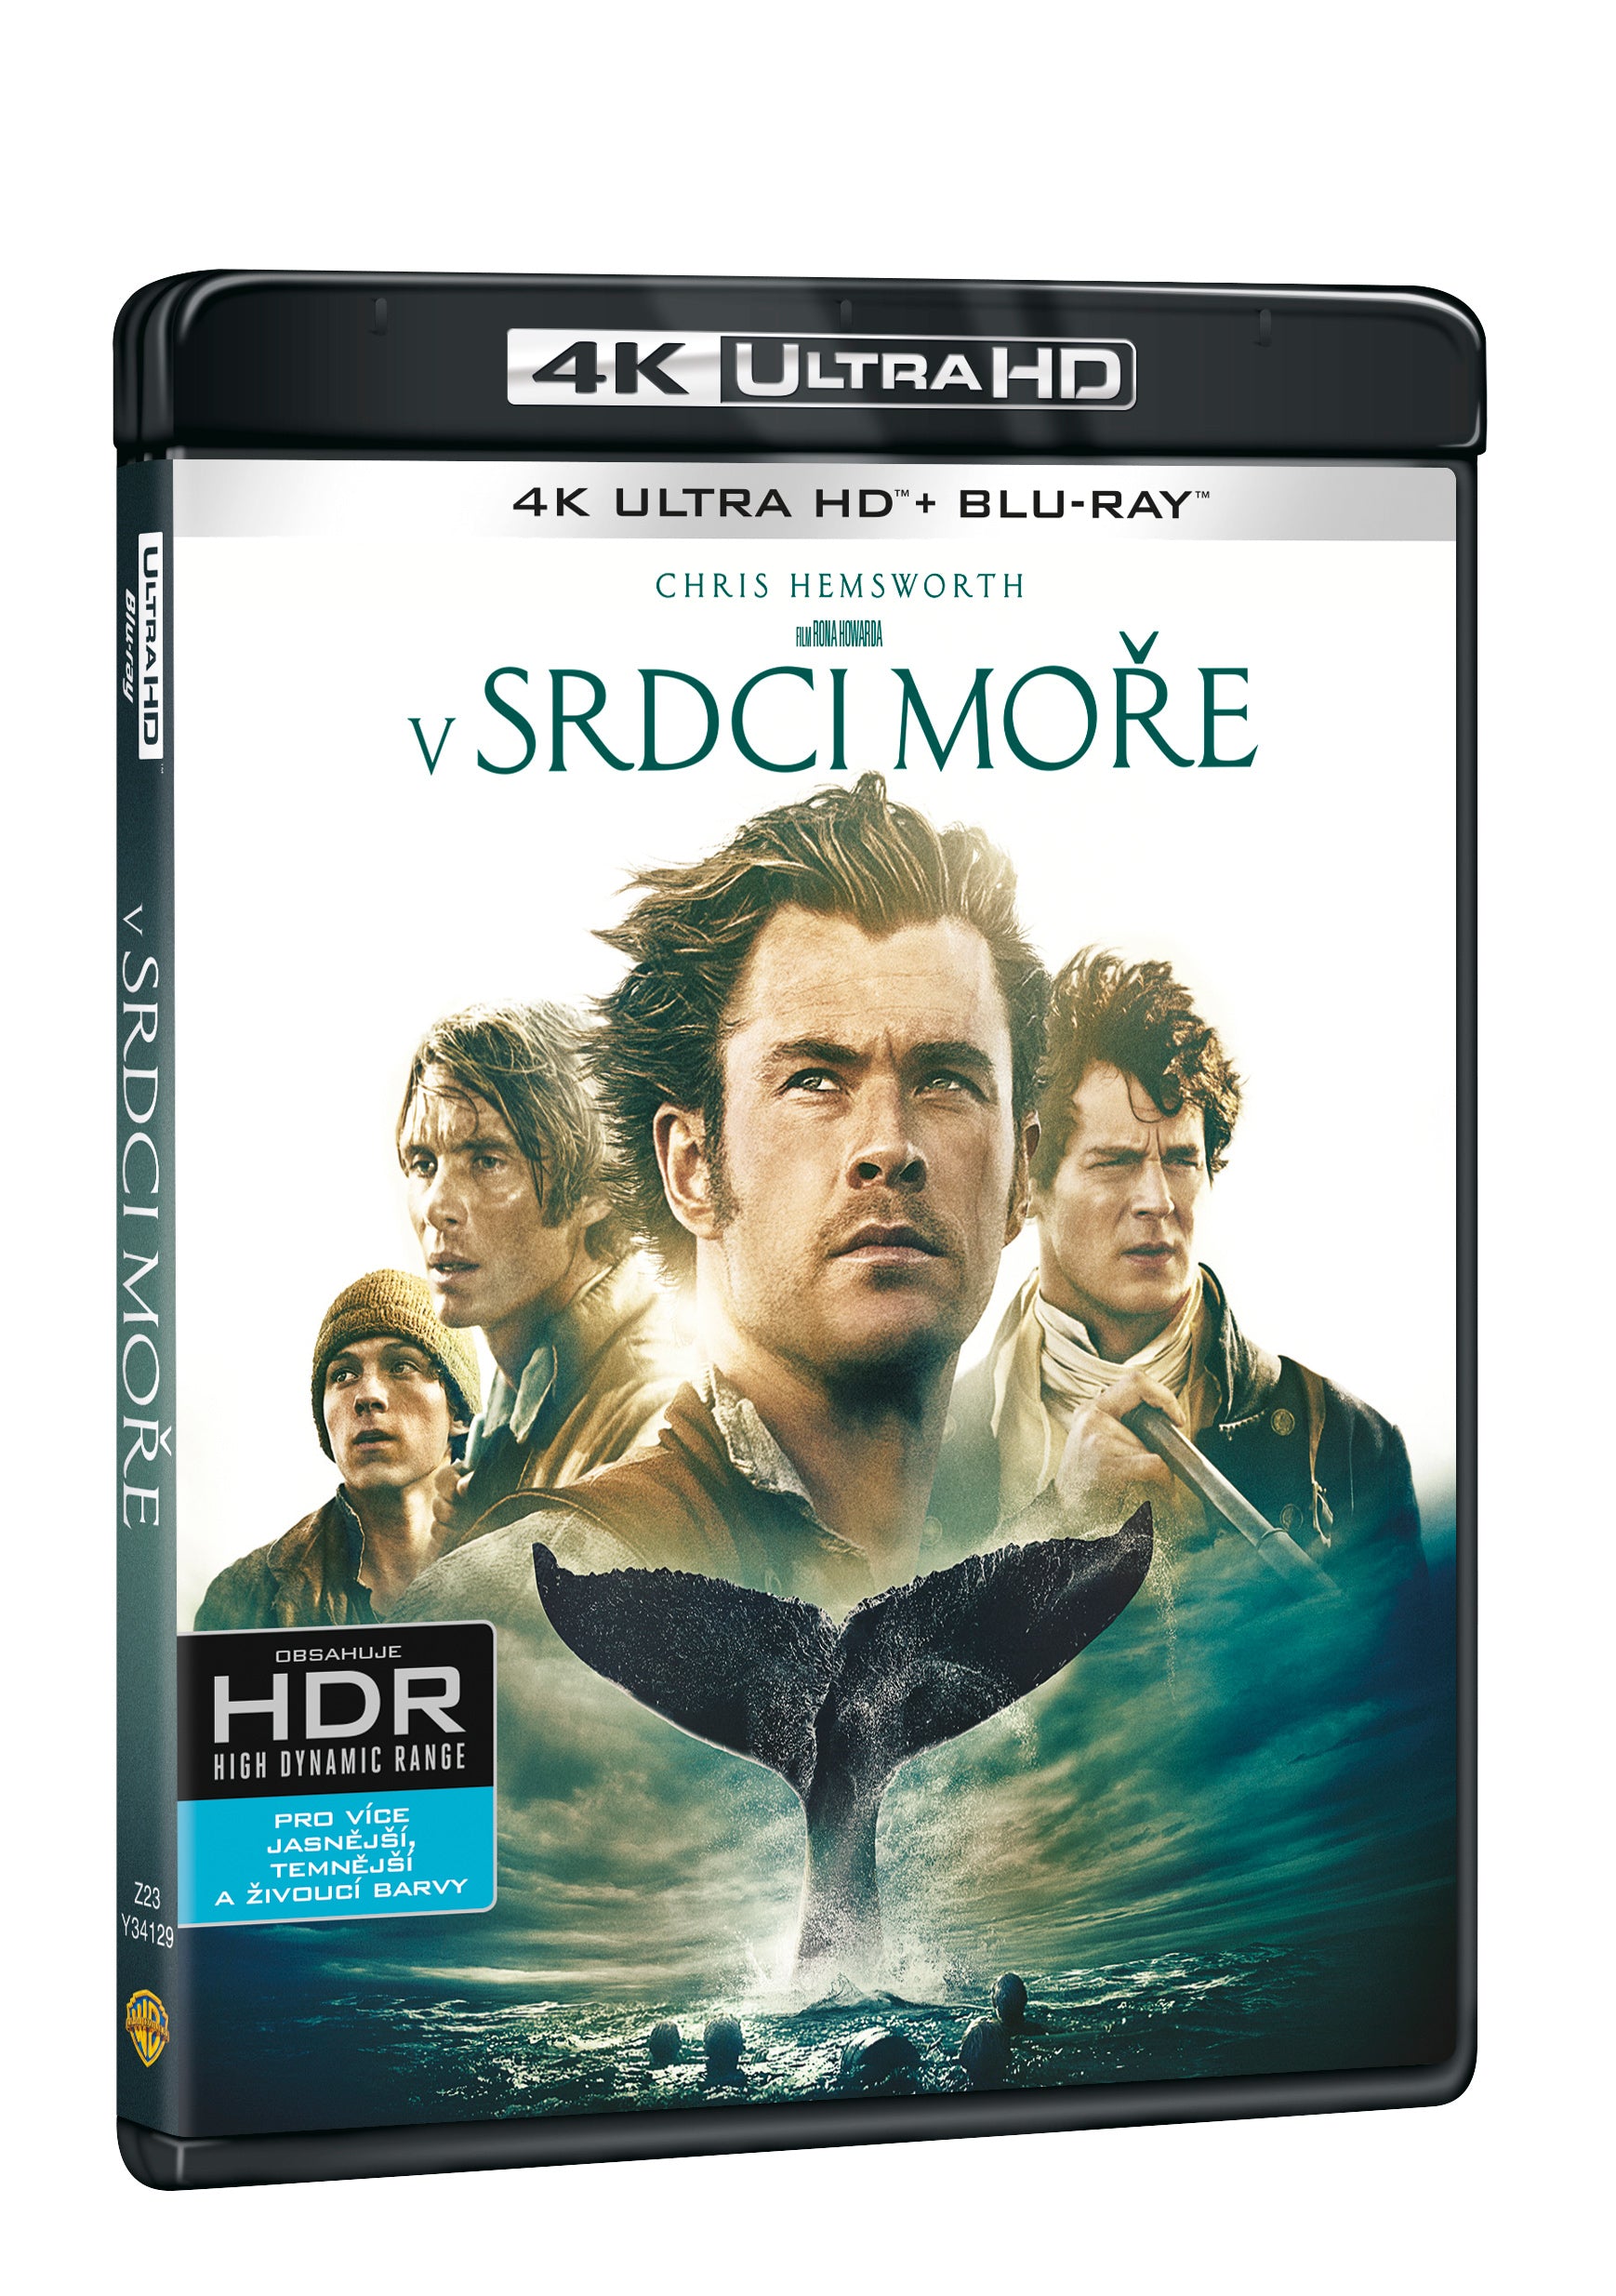 V srdci more 2BD (UHD+BD) / In the Heart of the Sea - Czech version